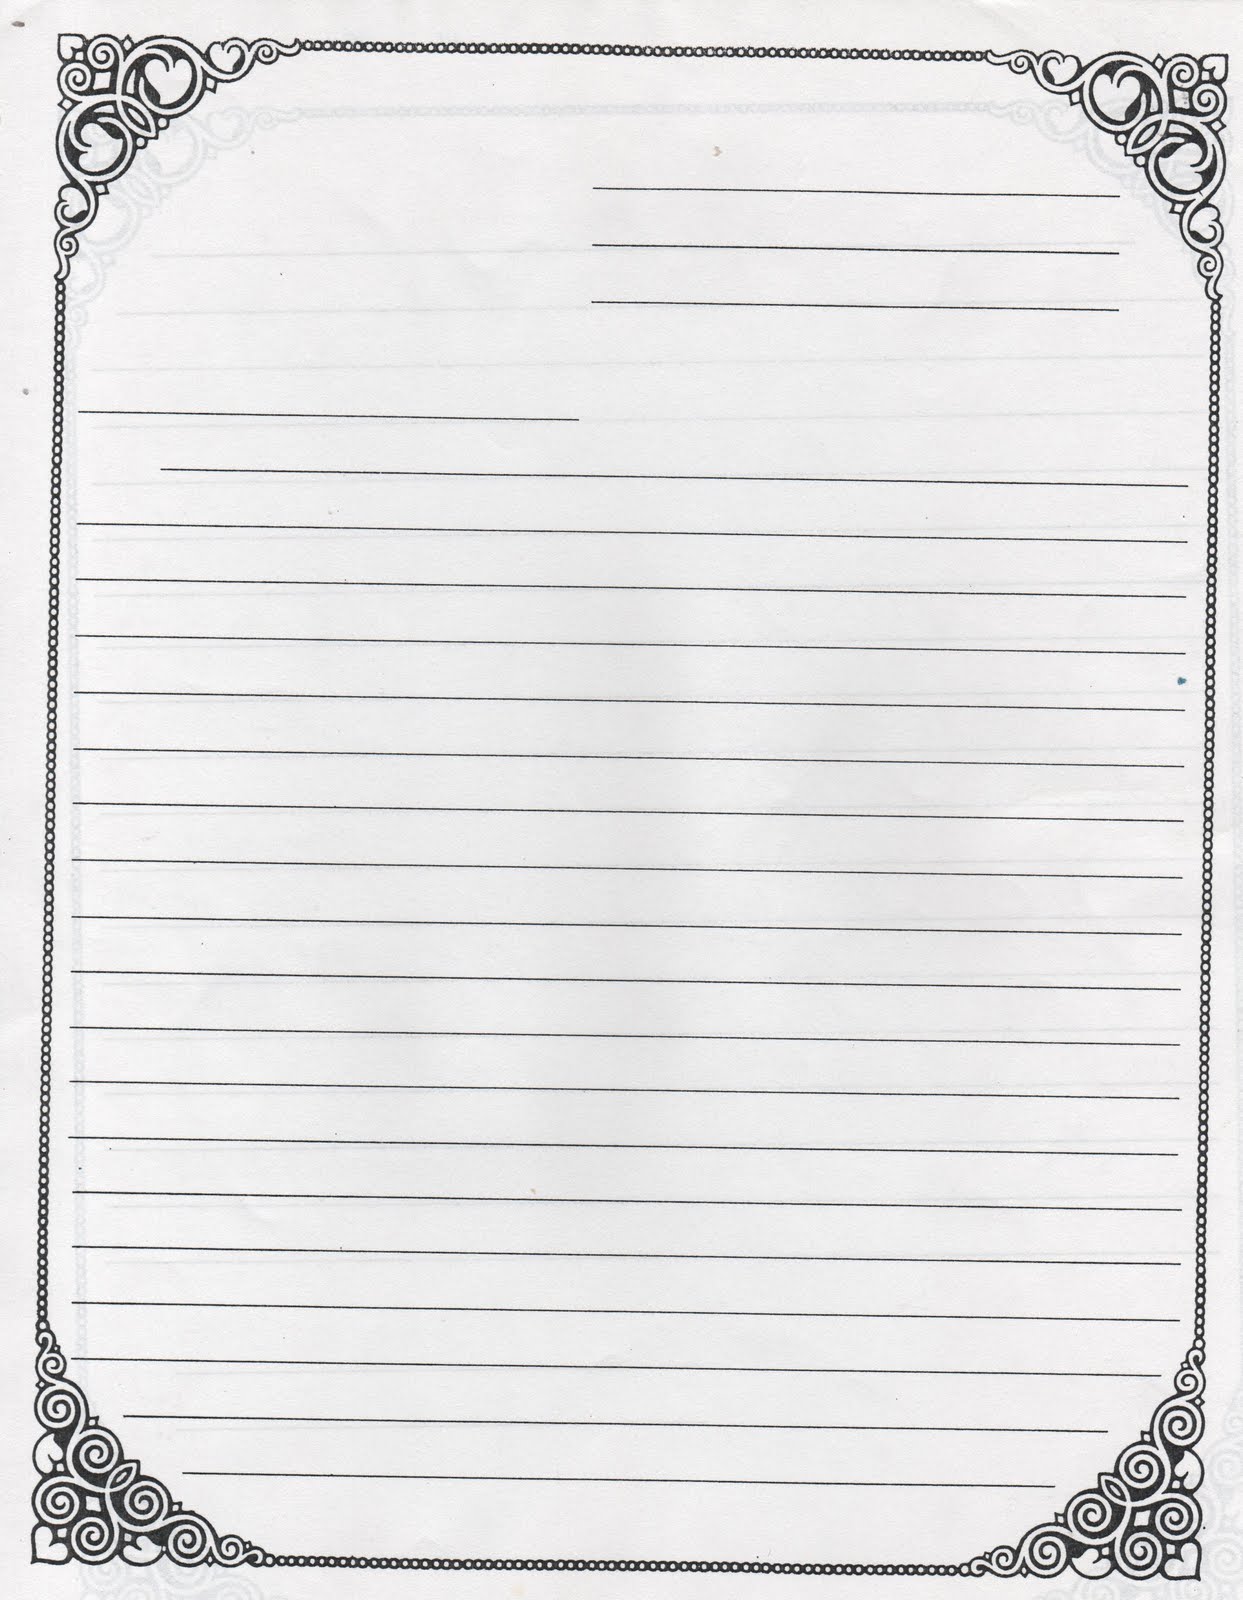 Letter Writing Paper Template from www.printablee.com